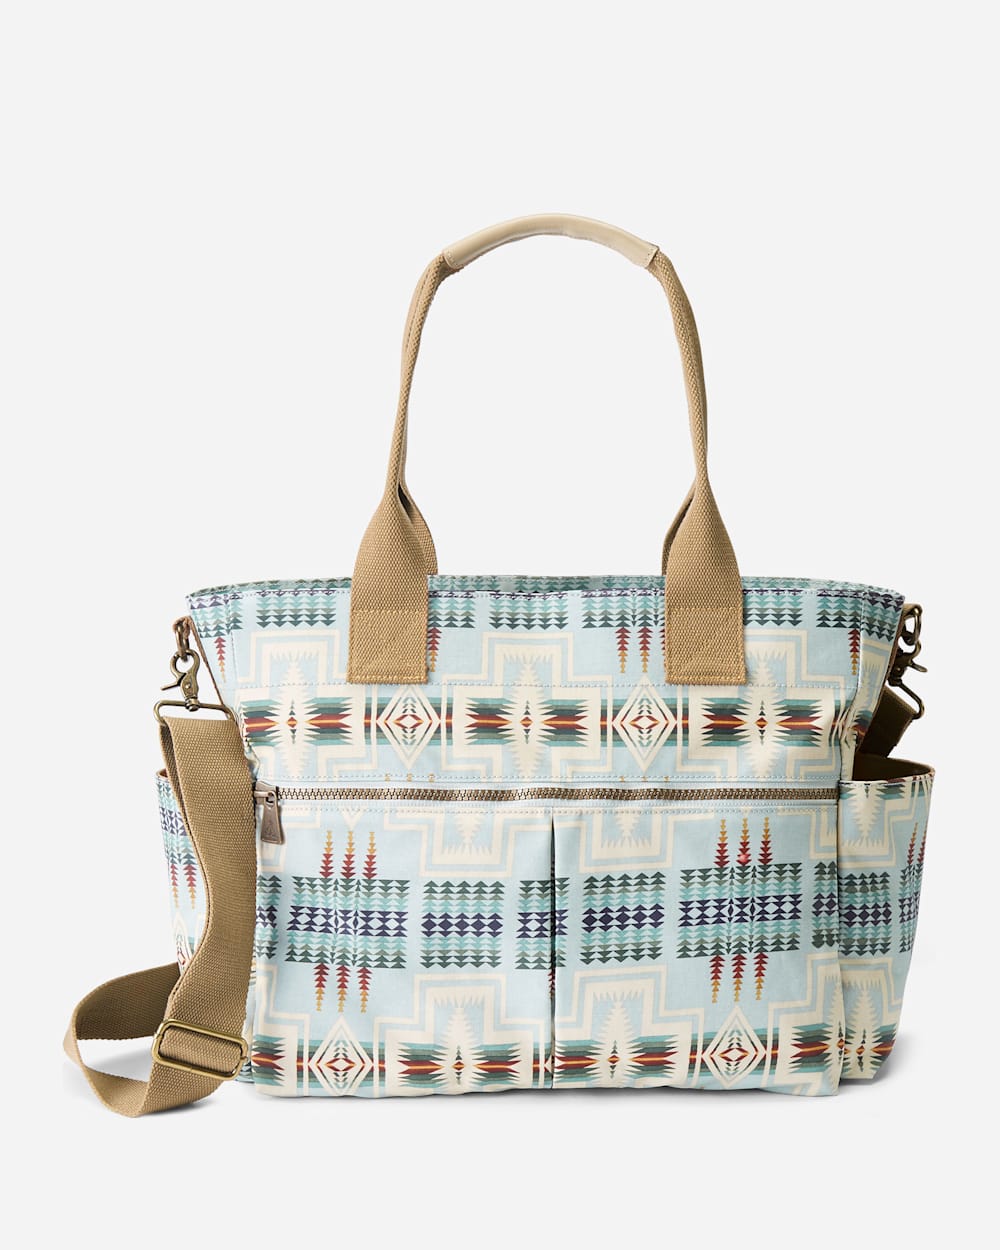 ALTERNATE VIEW OF HARDING CANOPY CANVAS SUPER TOTE IN AQUA image number 2